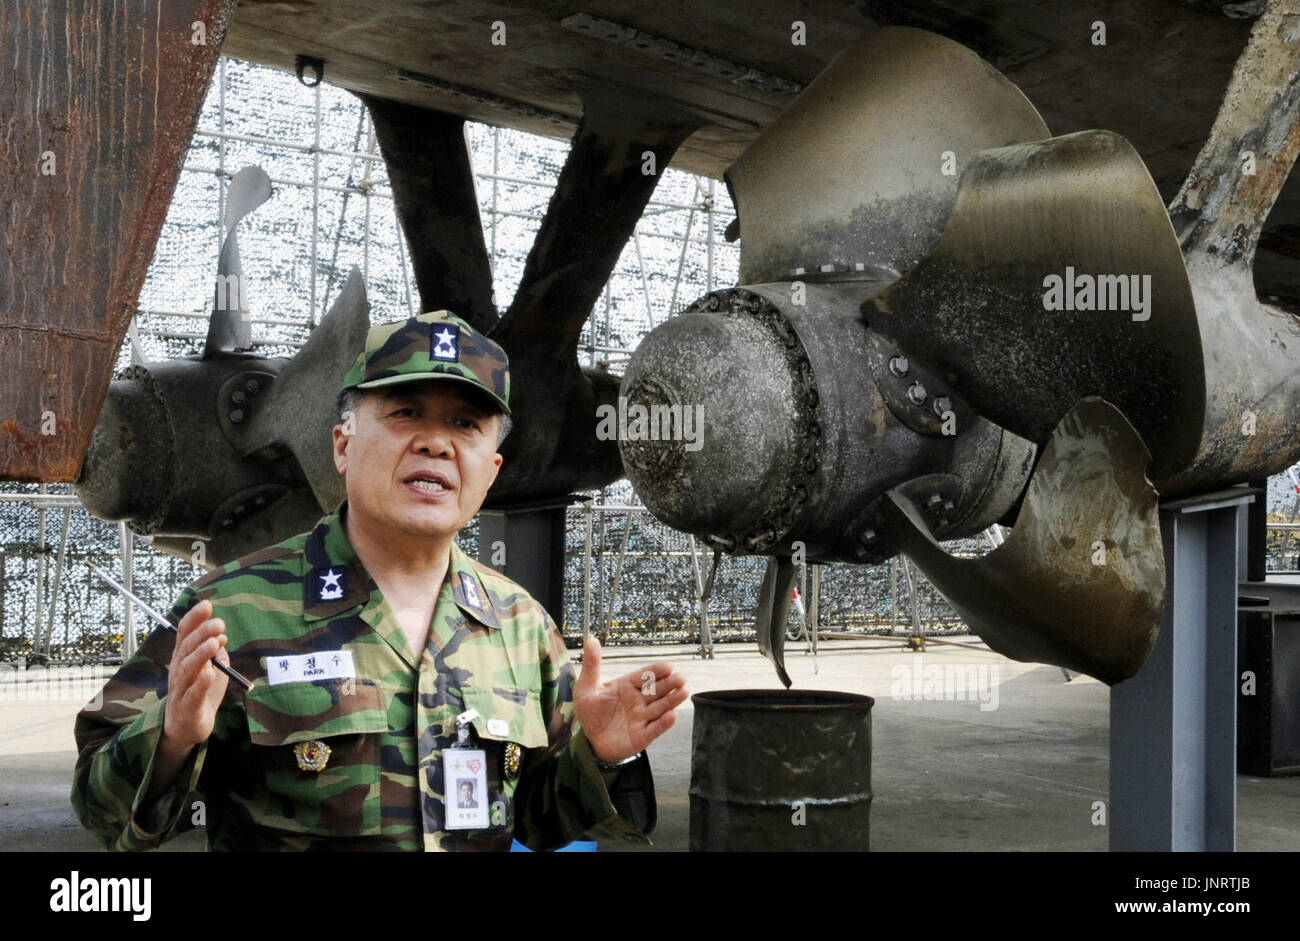 SEOUL, South Korea - A member of a joint investigation team of the South Korean military and the private sector talks about the deadly sinking of the country's naval ship Cheonan near the salvaged ship at a naval base in Gyeonggi Province on May 19, 2010. South Korea officially blamed North Korea the following day for the sinking of the warship that killed 46 sailors. (Kyodo) Stock Photo